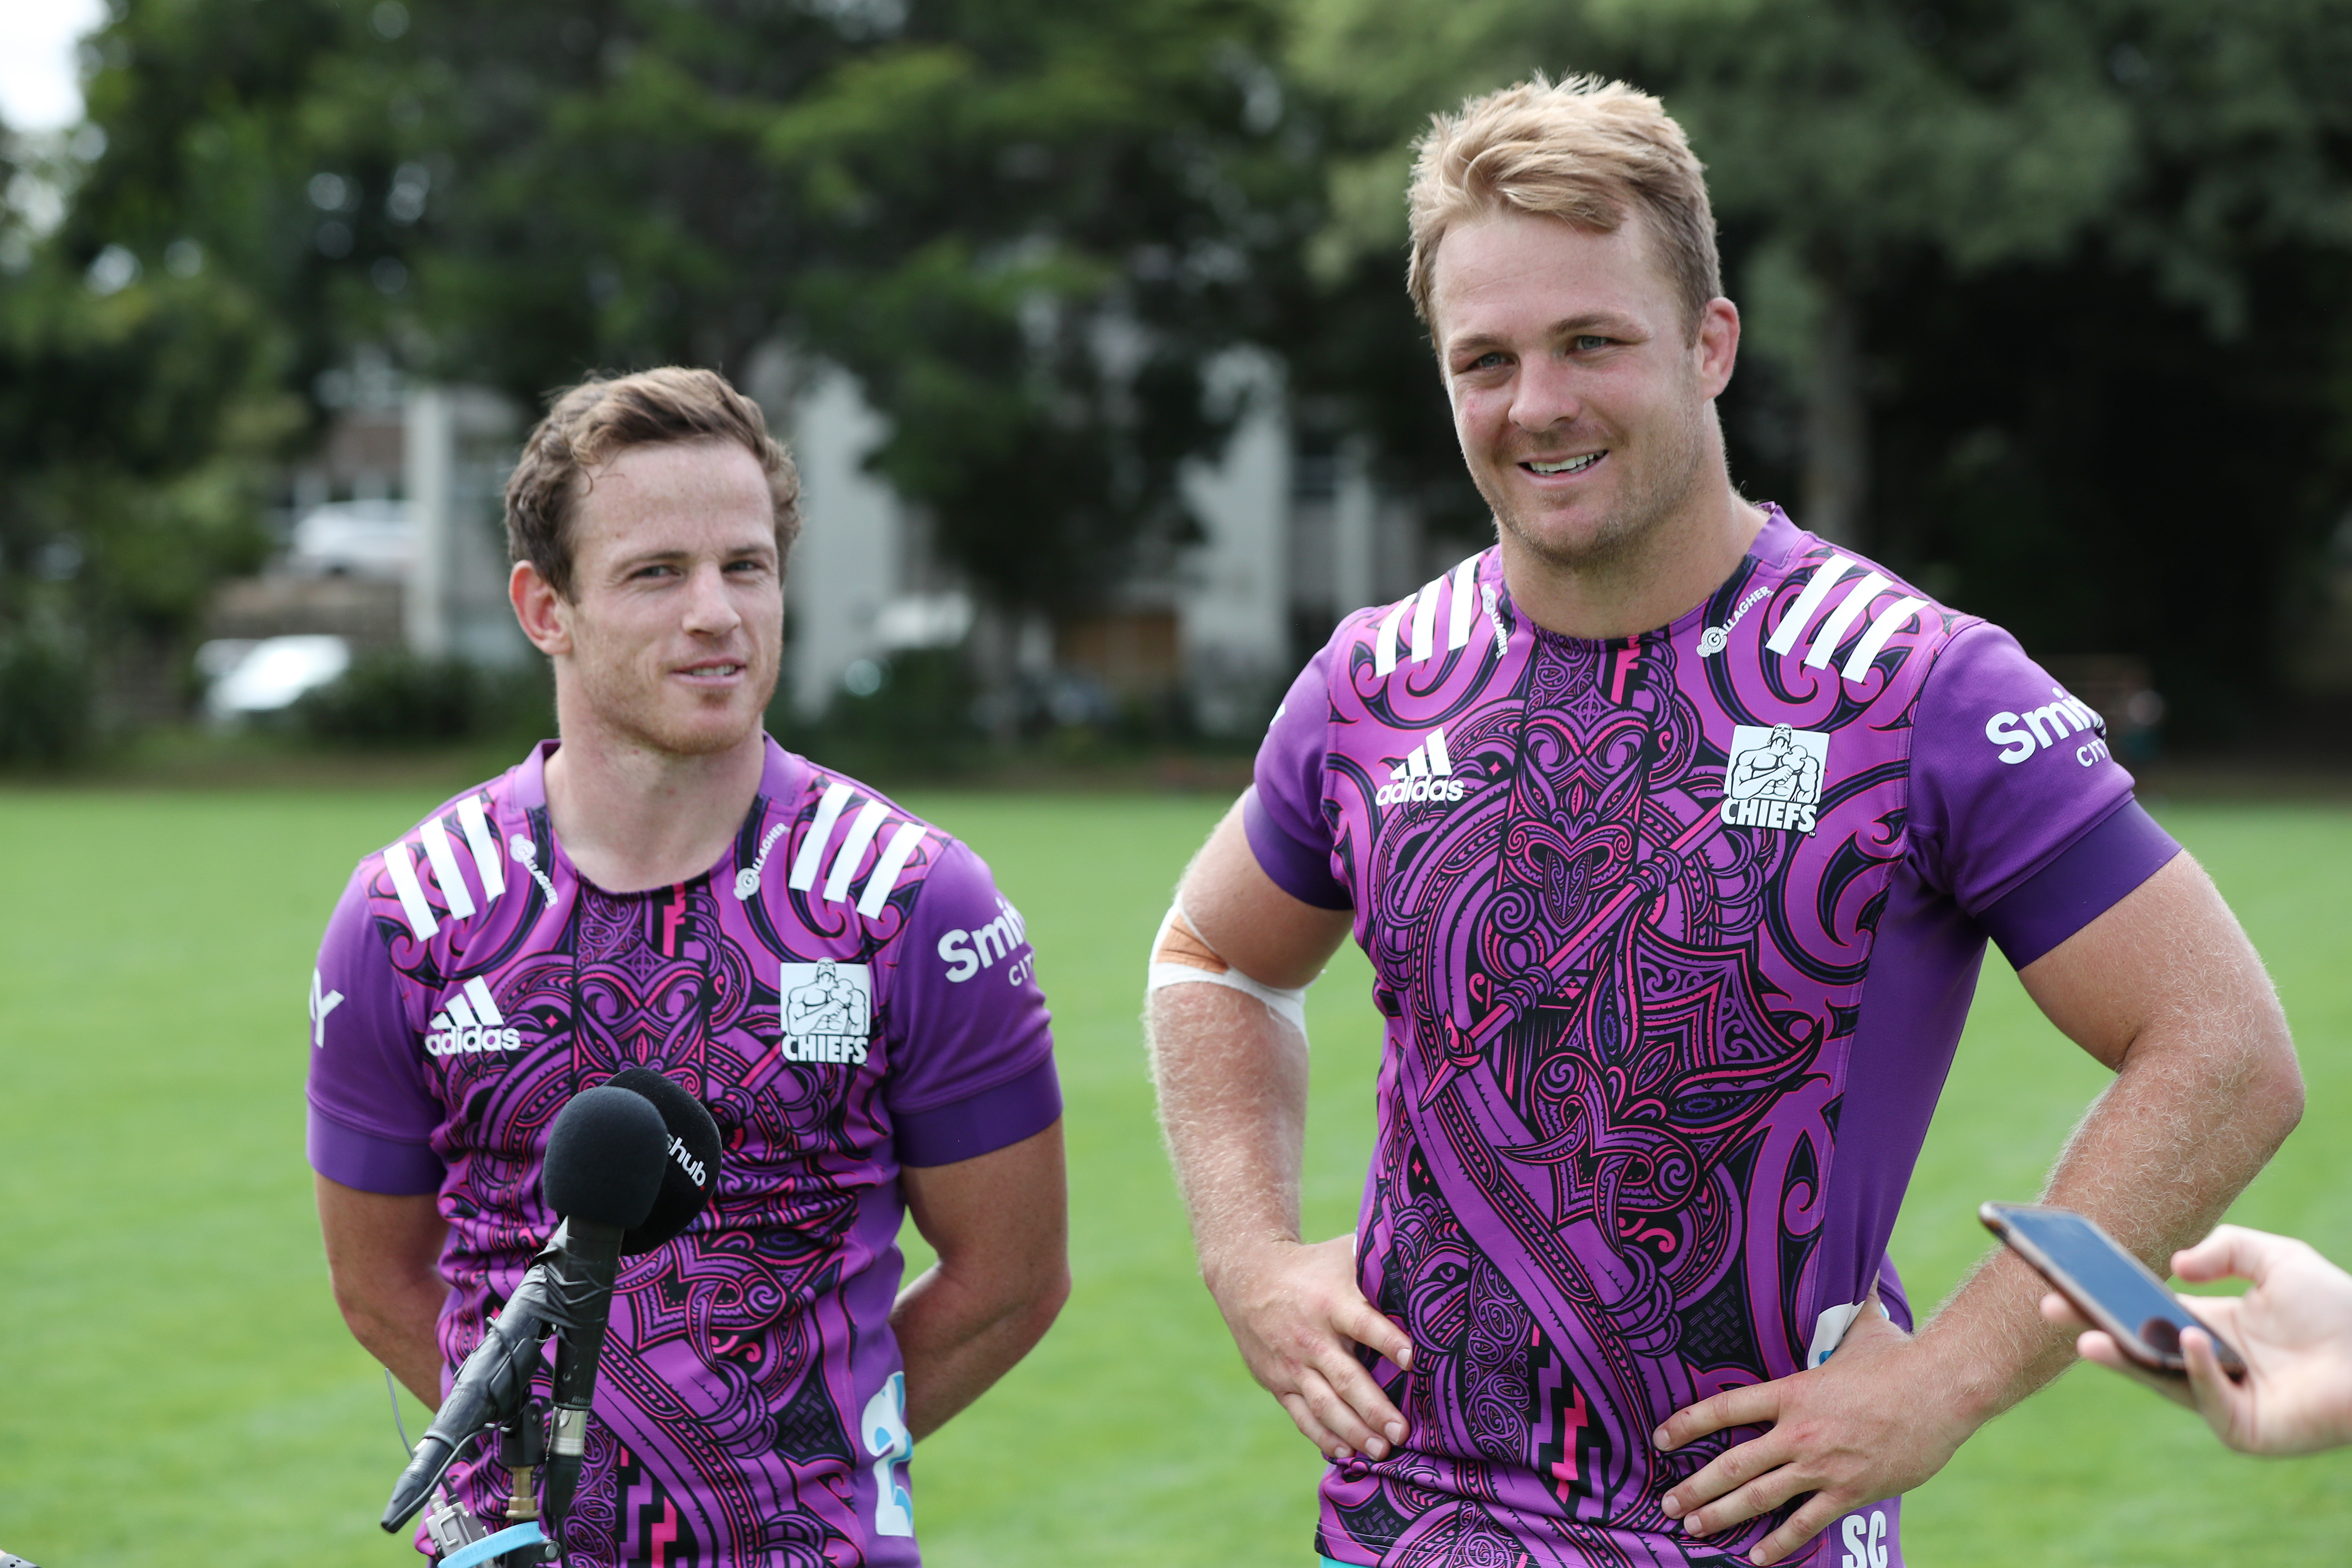 Melbourne Storm unveils shirts in partnership with